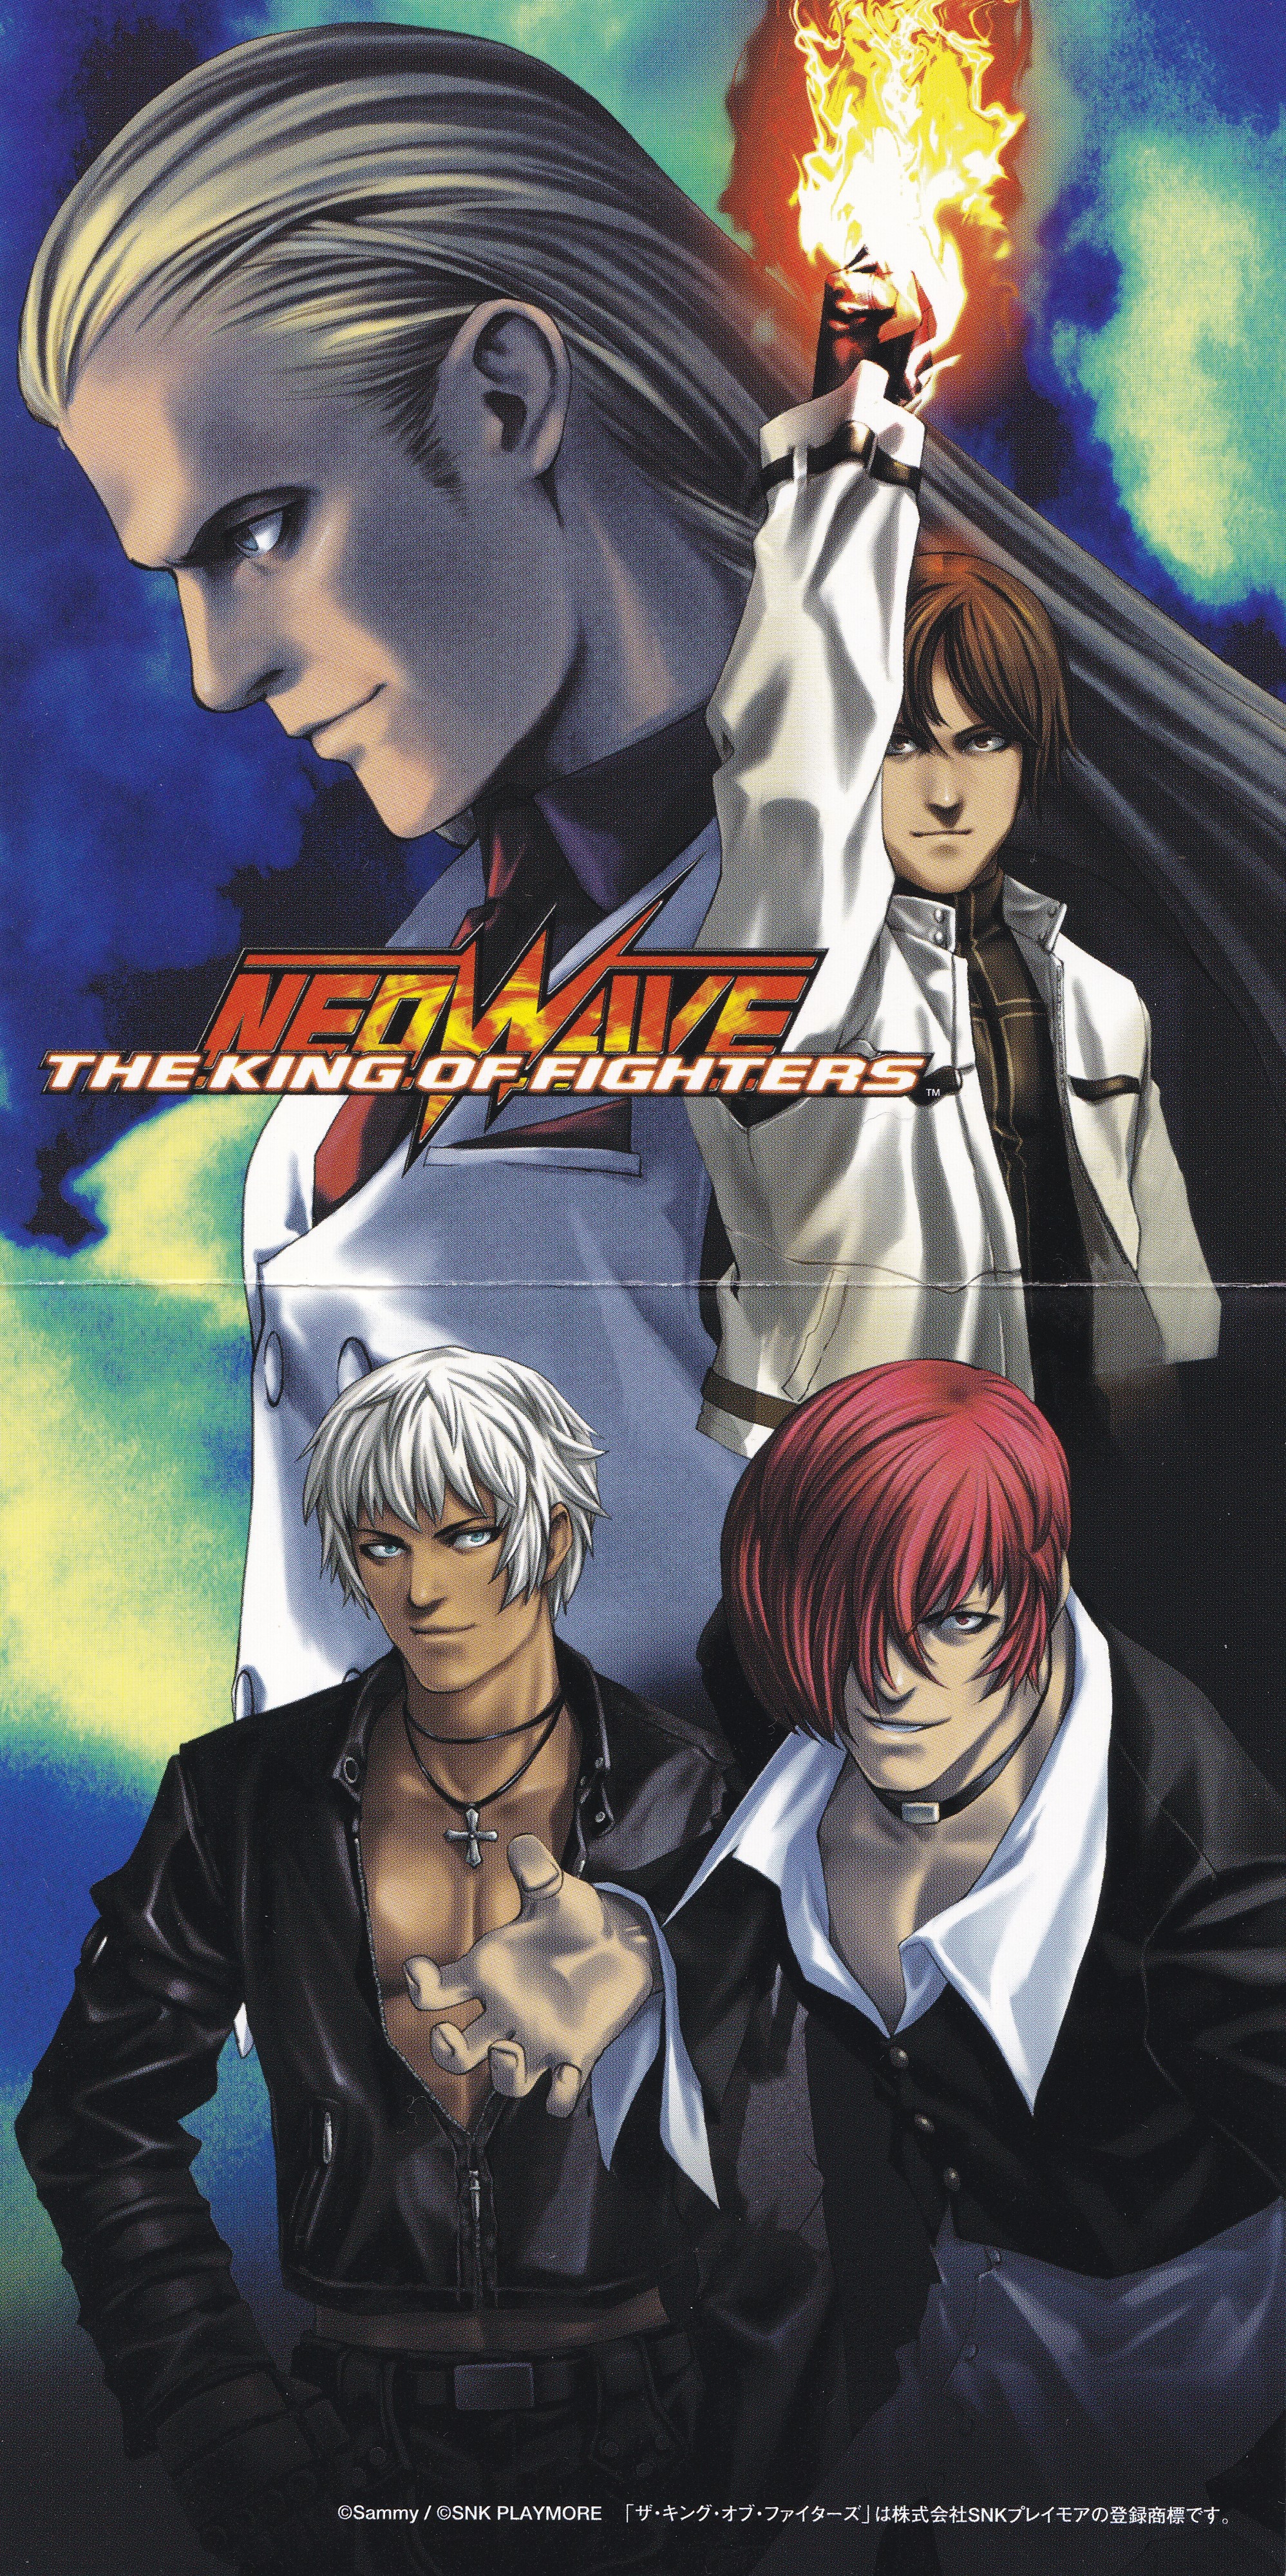 The King of Fighters 2002 (Manhua), SNK Wiki